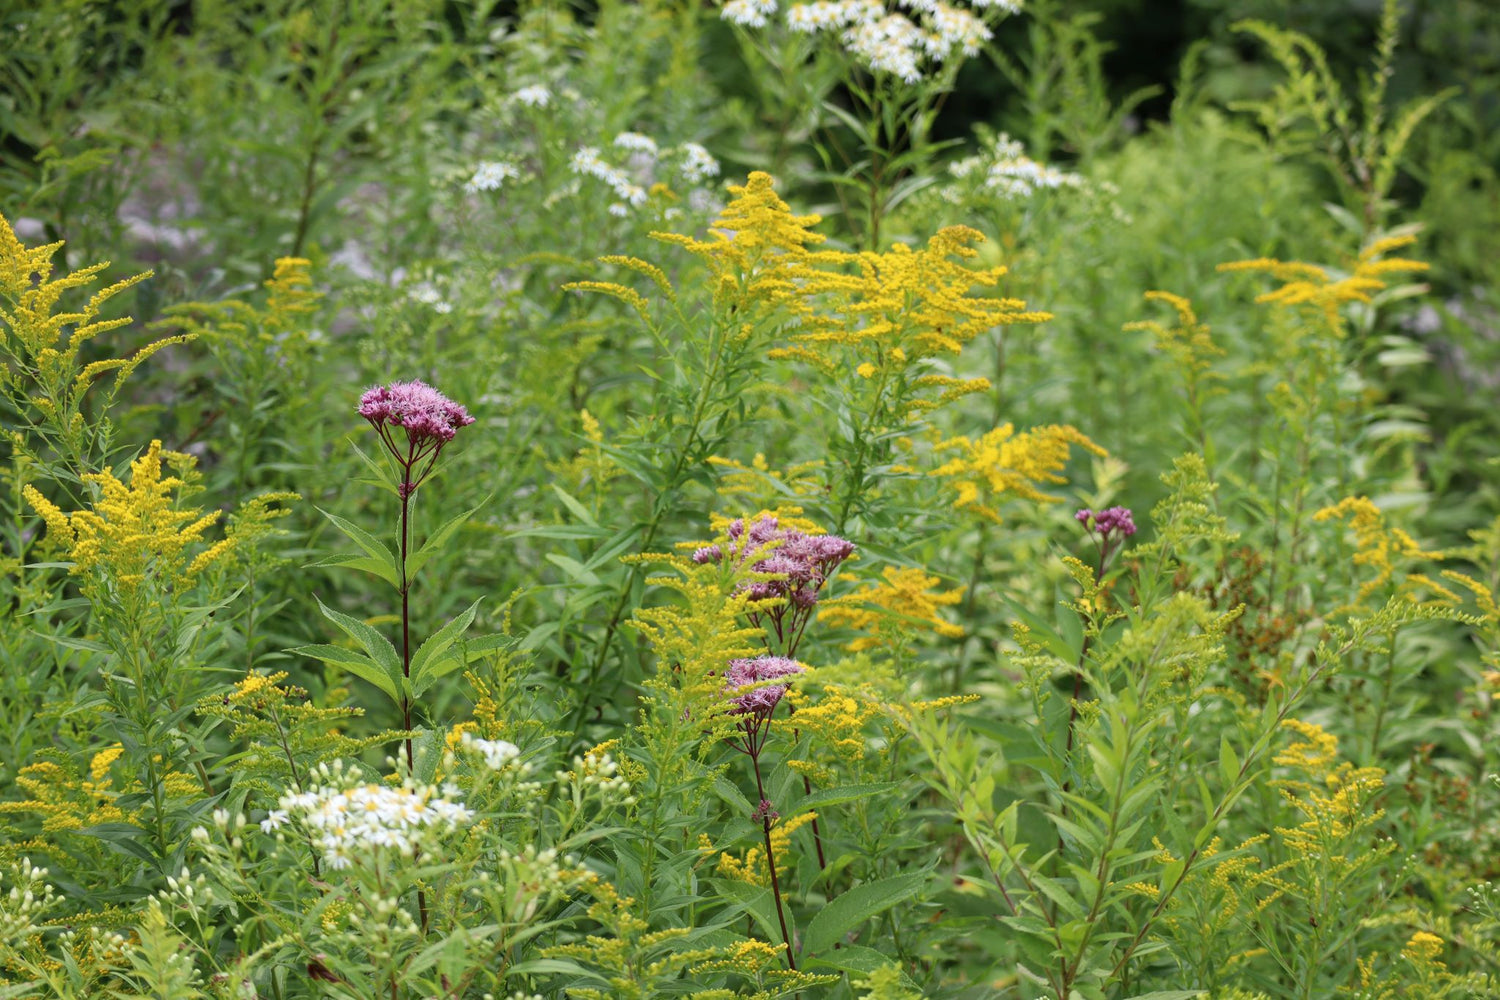 A native meadow of Goldenrods, Joe Pye Weed, and Flat whitetop aster